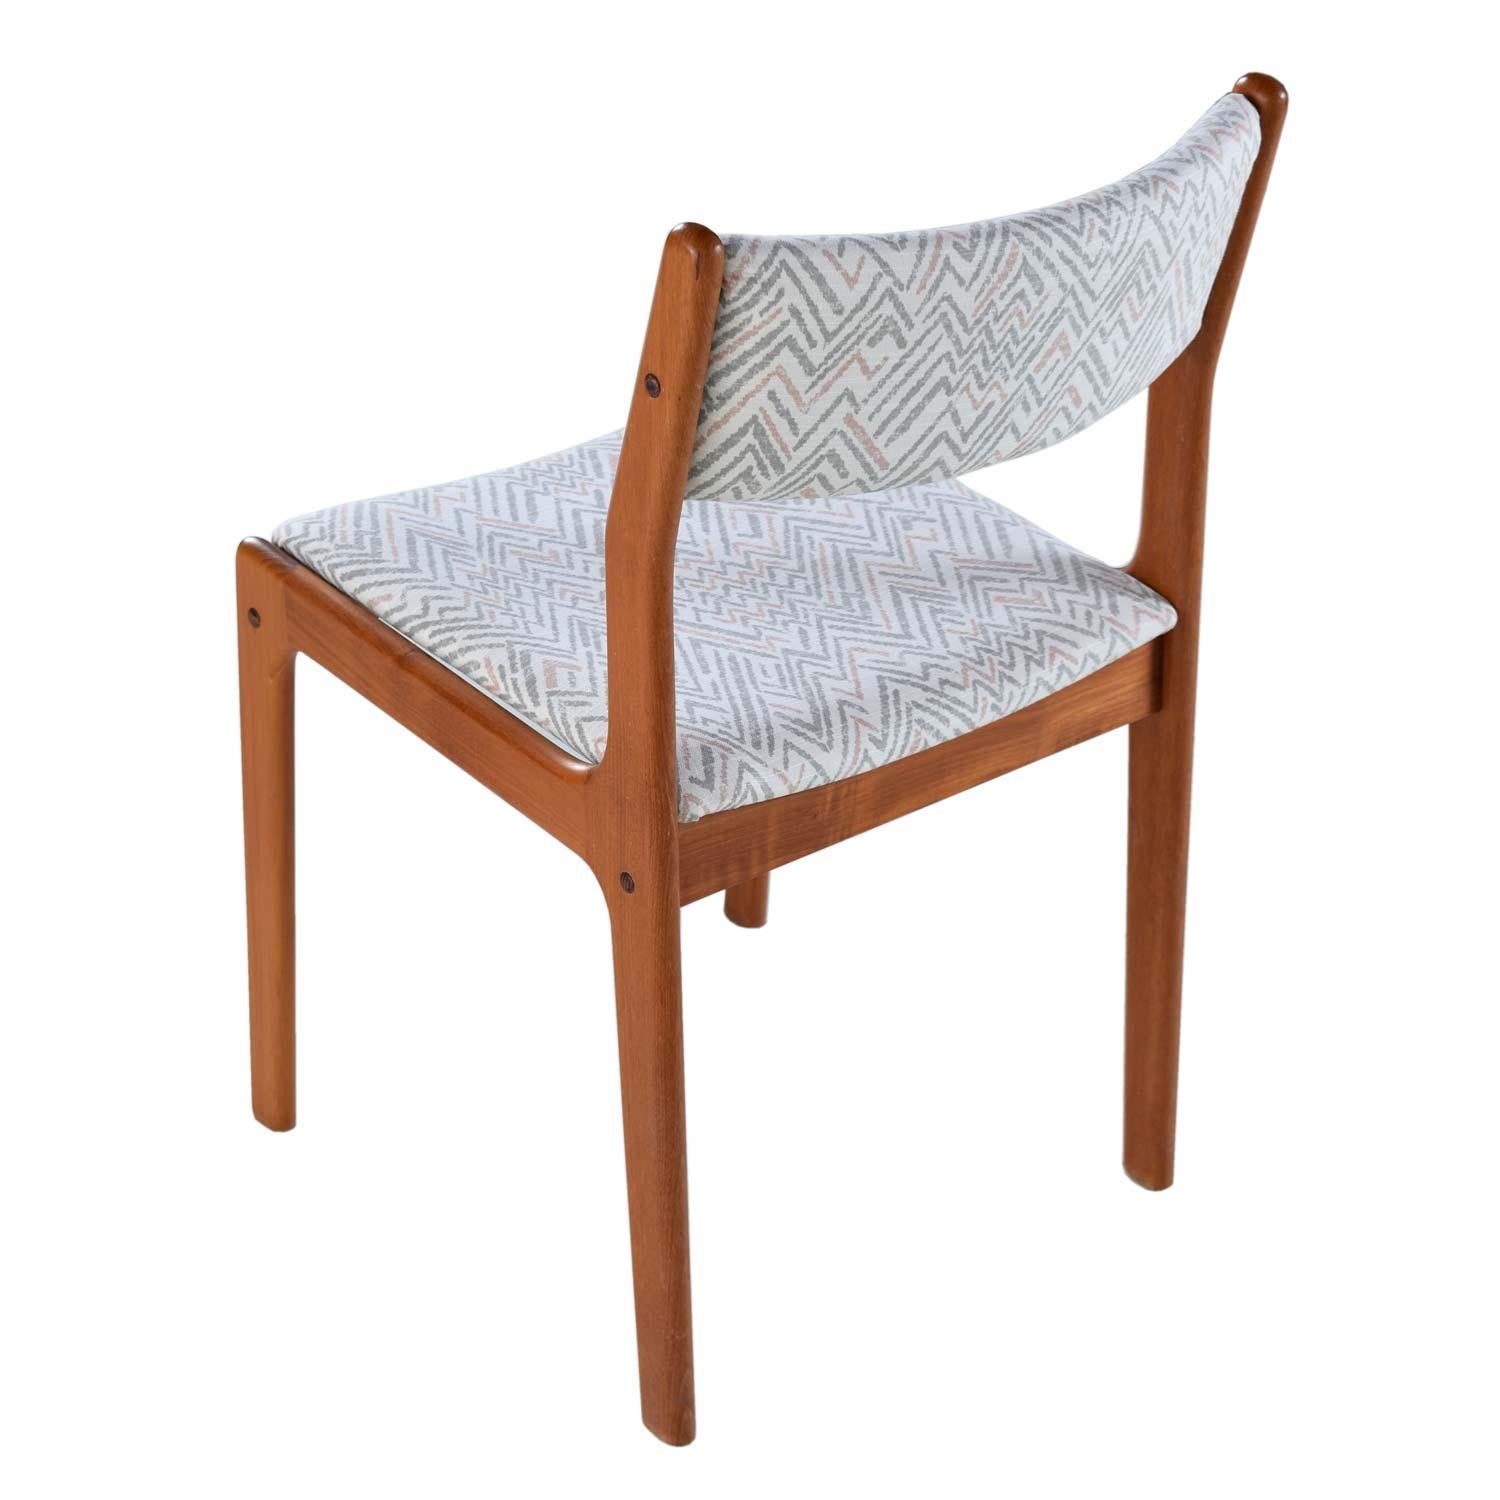 This set of six vintage teak dining chairs have a contemporary flair with their new upholstery. The previous owner updated the solid teak wood chairs with this stylish modern fabric, propelling them into the 21st century. These chairs would look